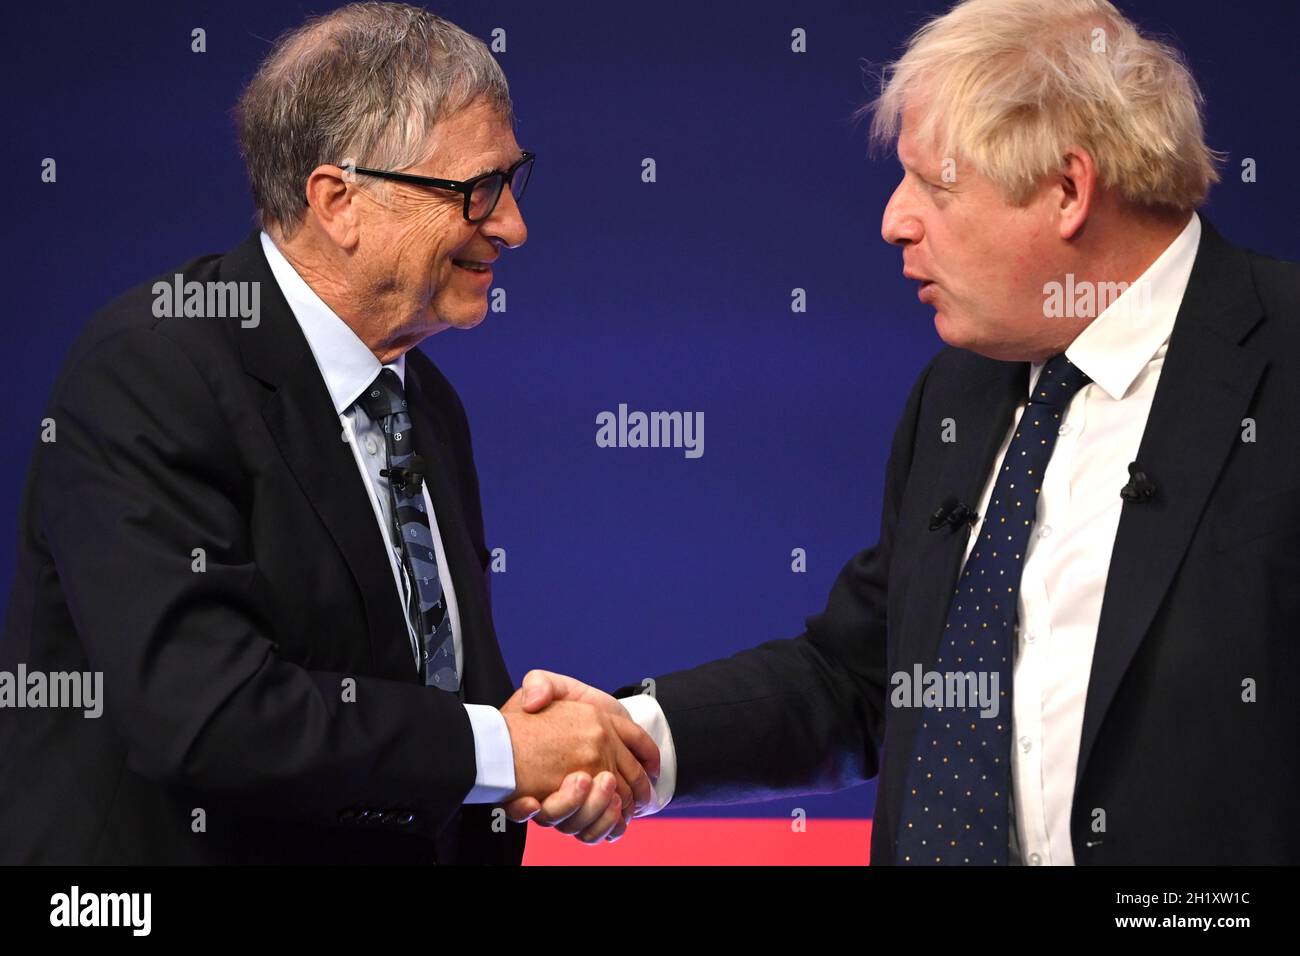 Prime Minister Boris Johnson (right) shakes hands with American Businessman Bill Gates during the Global Investment Summit at the Science Museum, London. Picture date: Tuesday October 19, 2021. Stock Photo